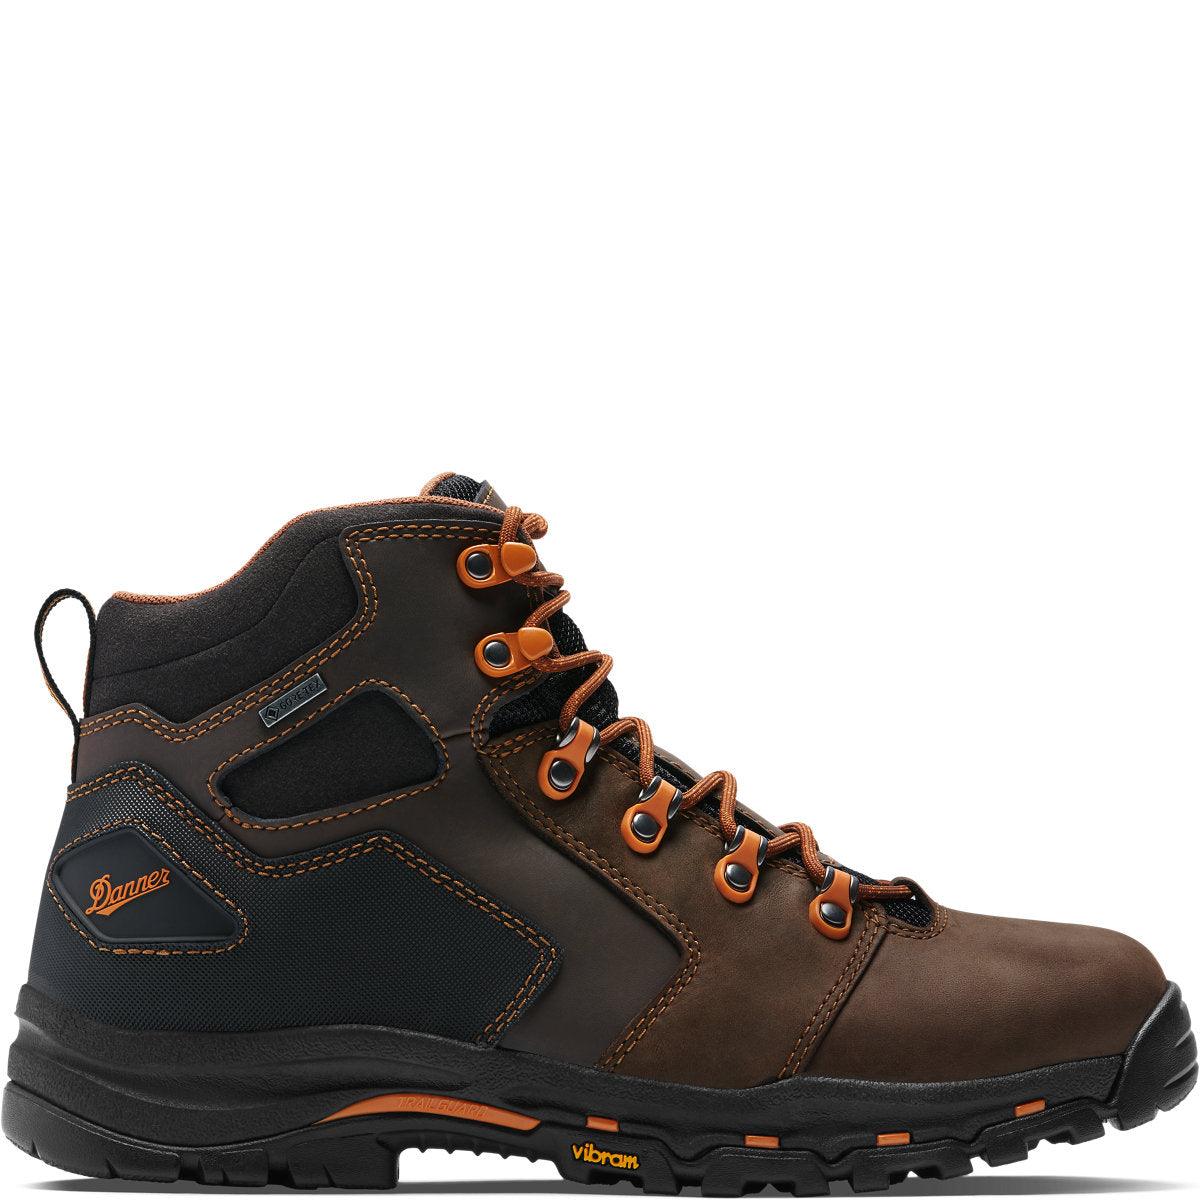 Men's Vicious Work Boot - 4.5" Brown / Orange - Purpose-Built / Home of the Trades